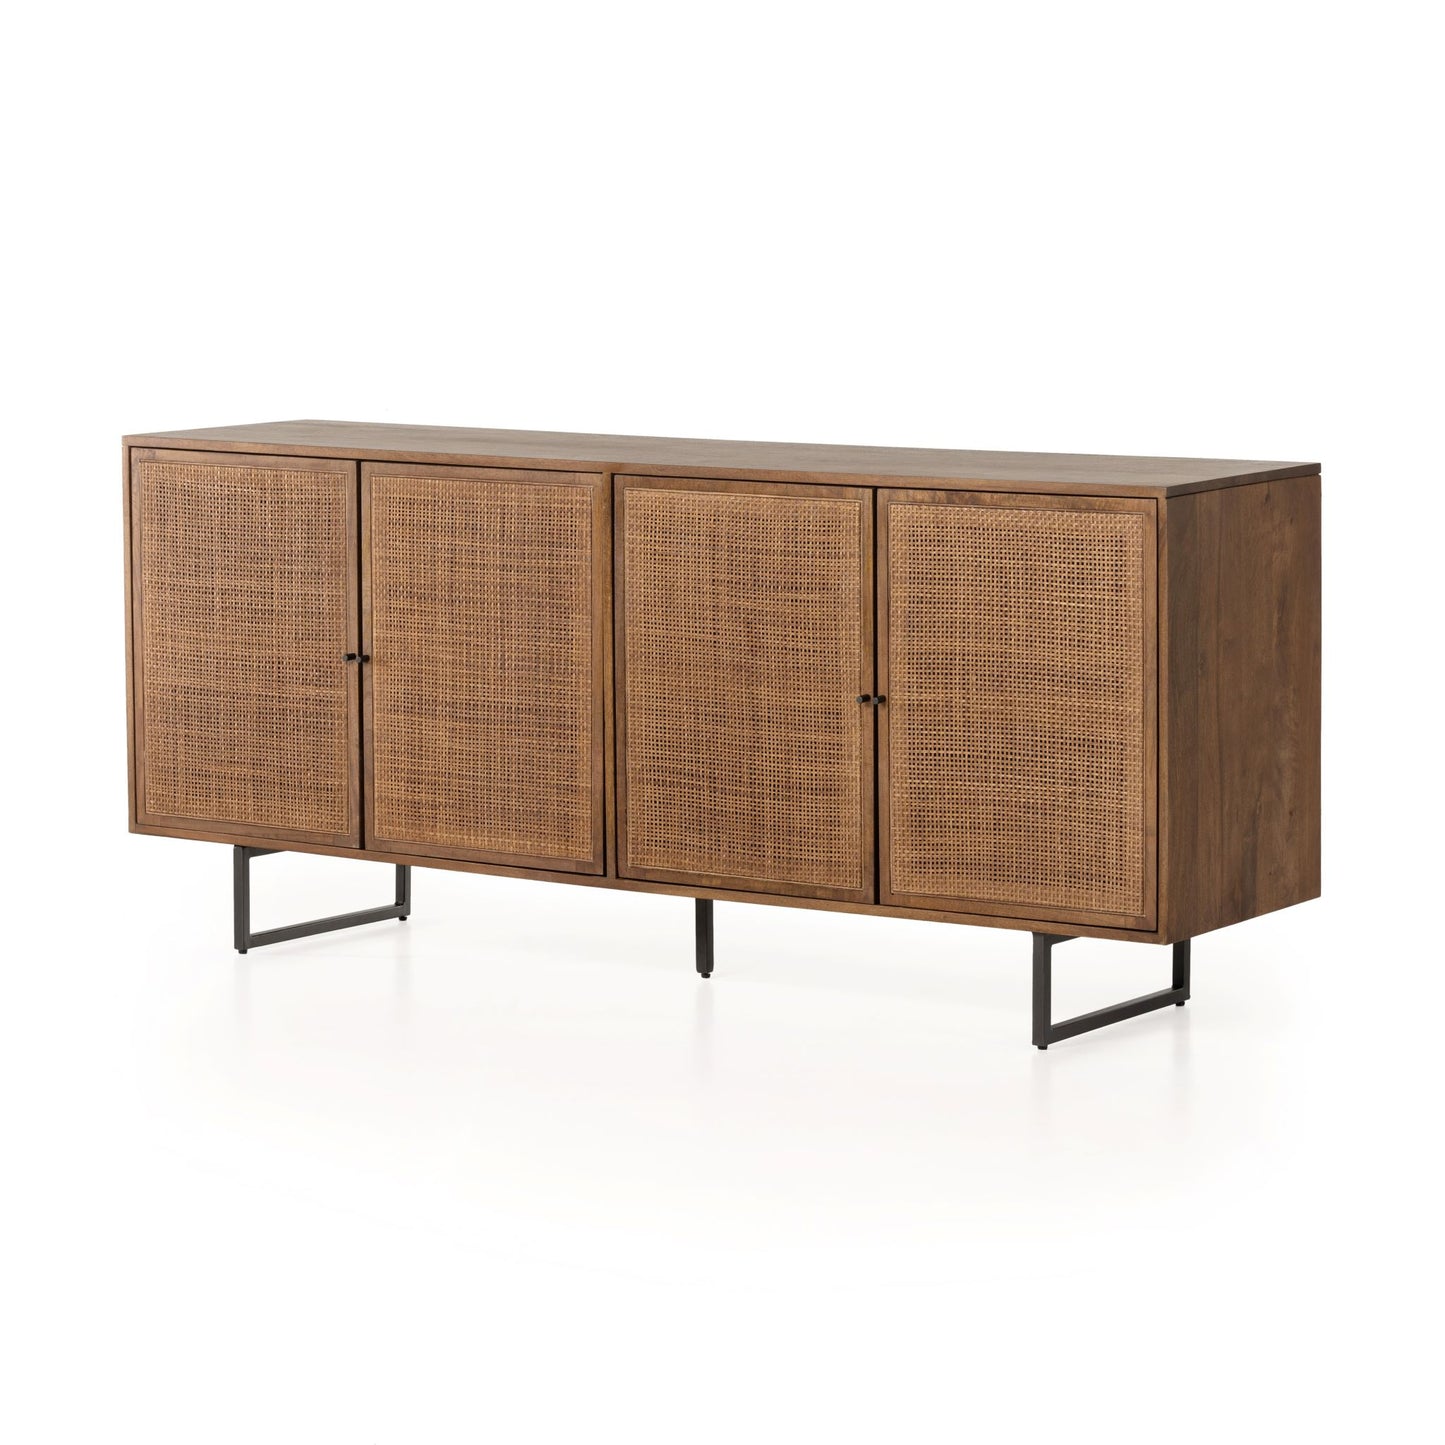 Load image into Gallery viewer, Carmel Sideboard Brown WashSideboard Four Hands  Brown Wash   Four Hands, Burke Decor, Mid Century Modern Furniture, Old Bones Furniture Company, Old Bones Co, Modern Mid Century, Designer Furniture, https://www.oldbonesco.com/
